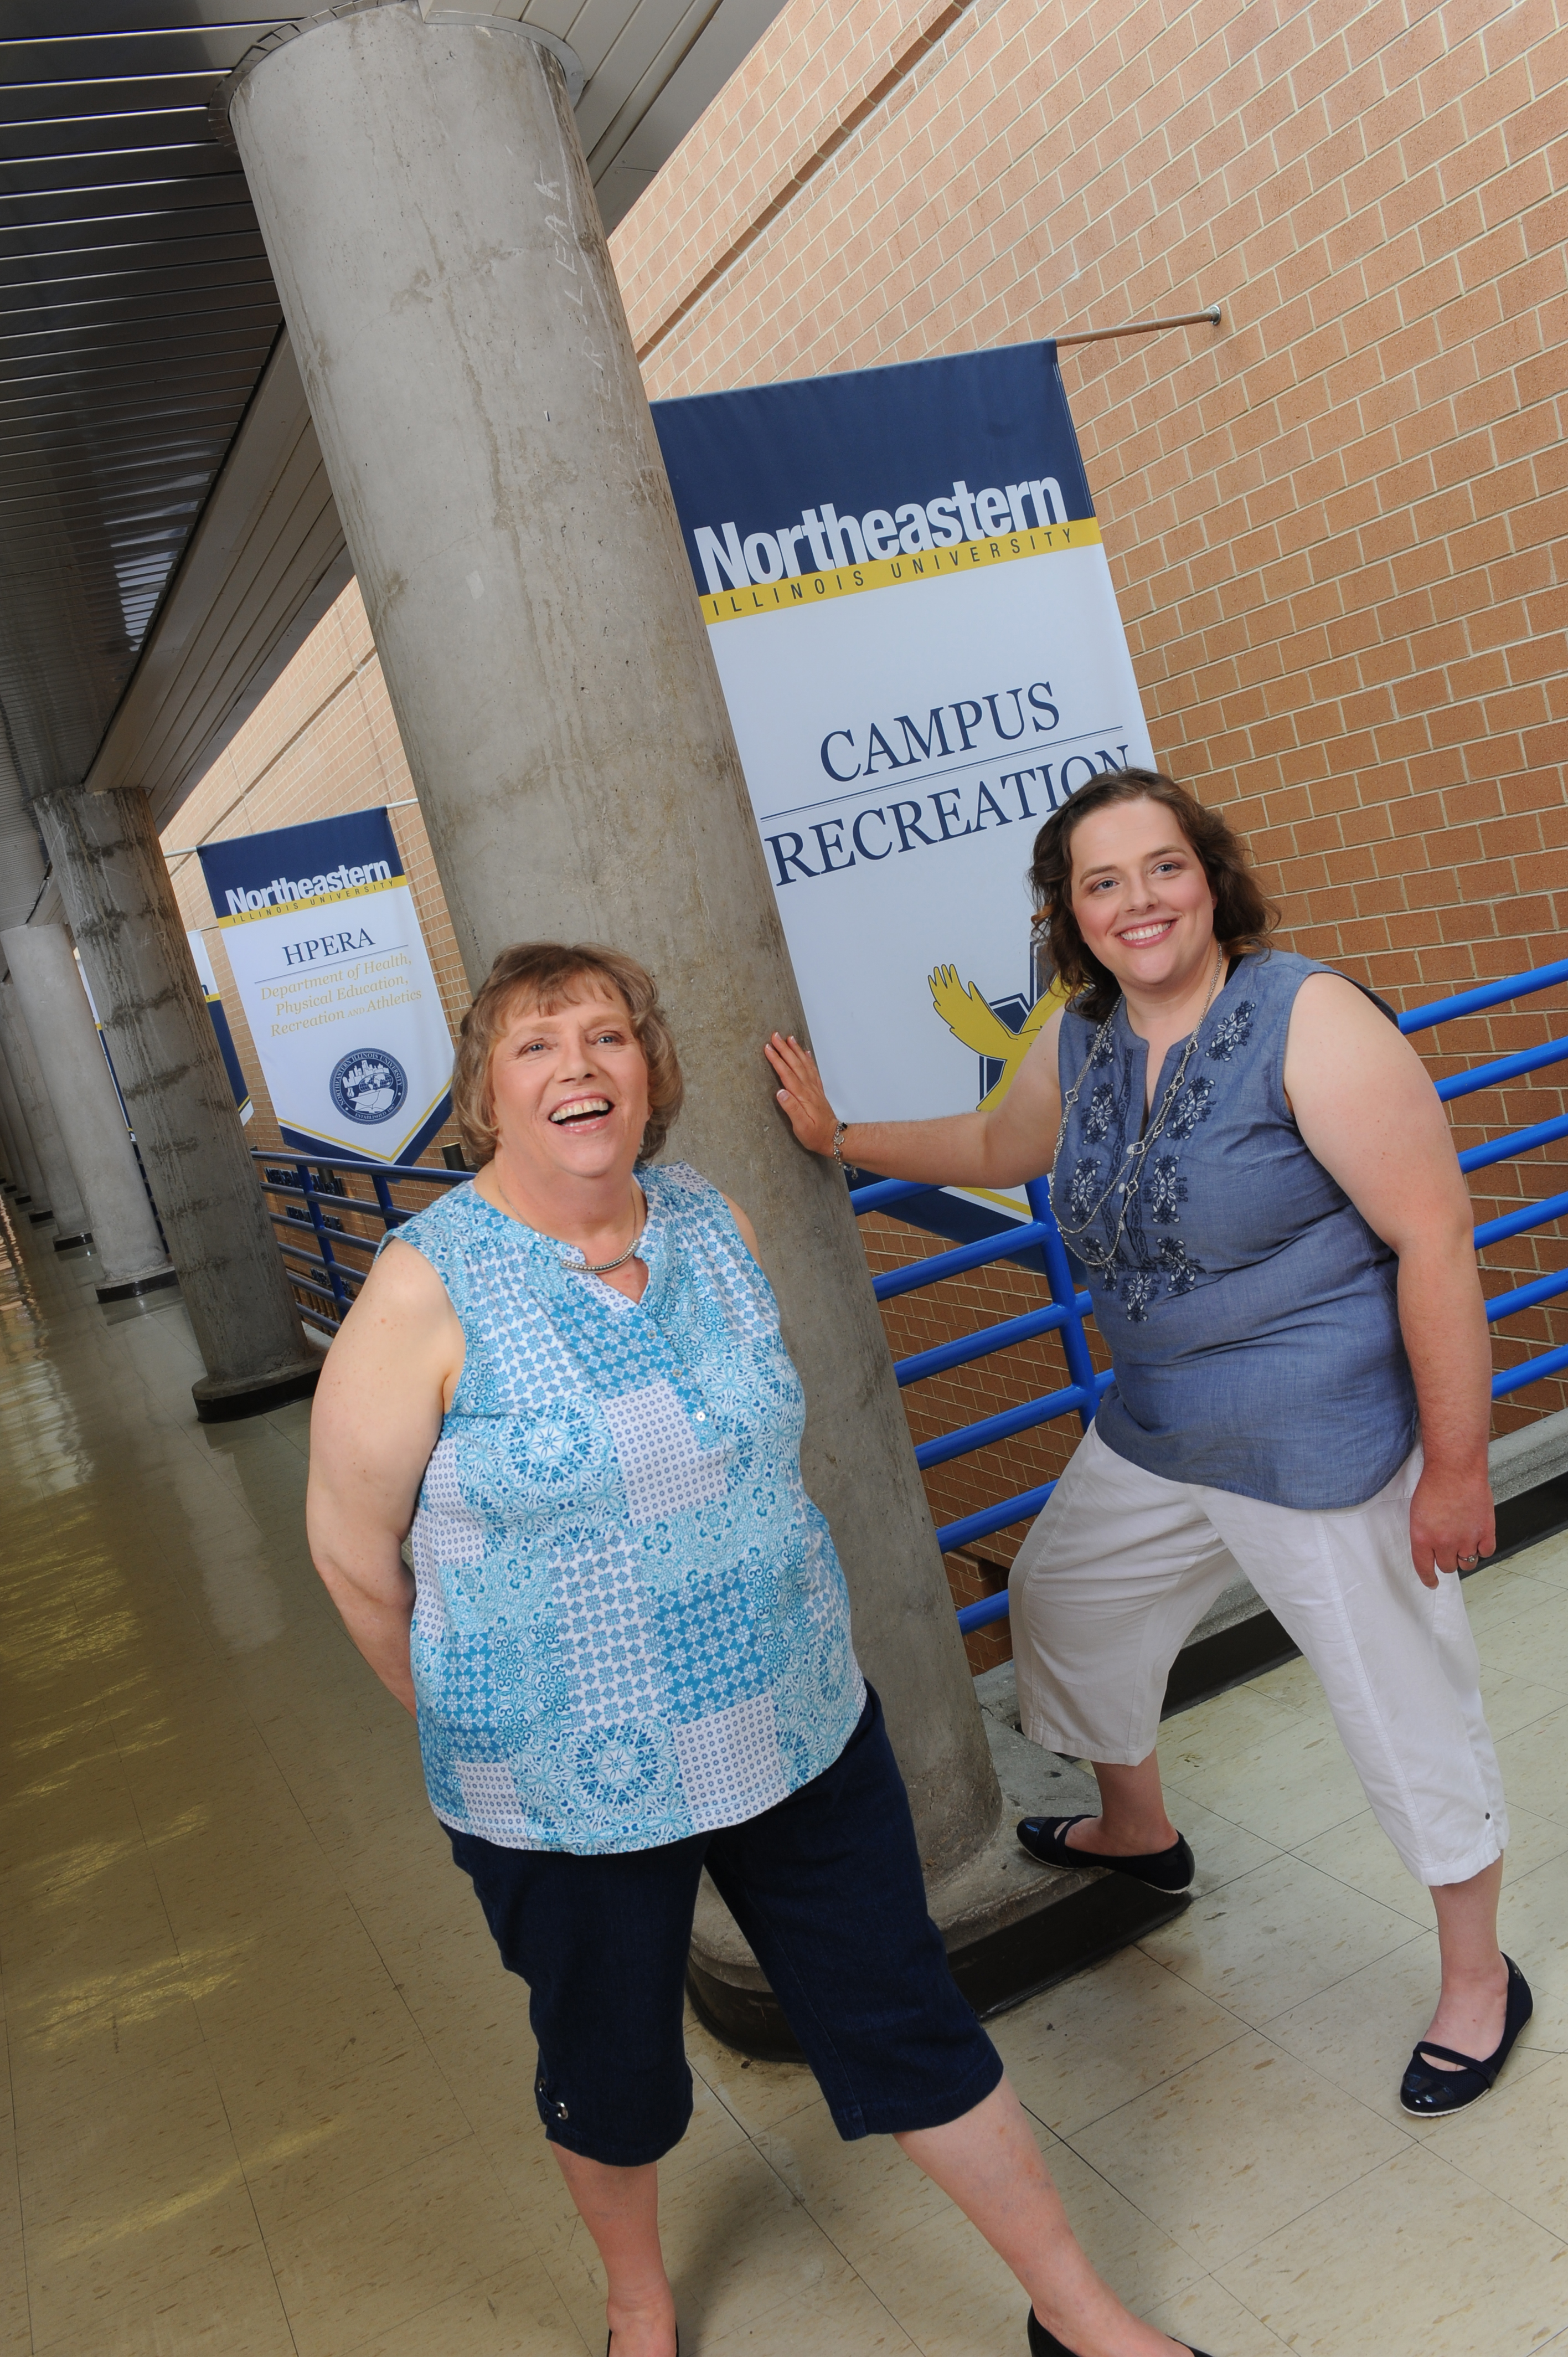 Jean and Angelina posing in the campus recreation center